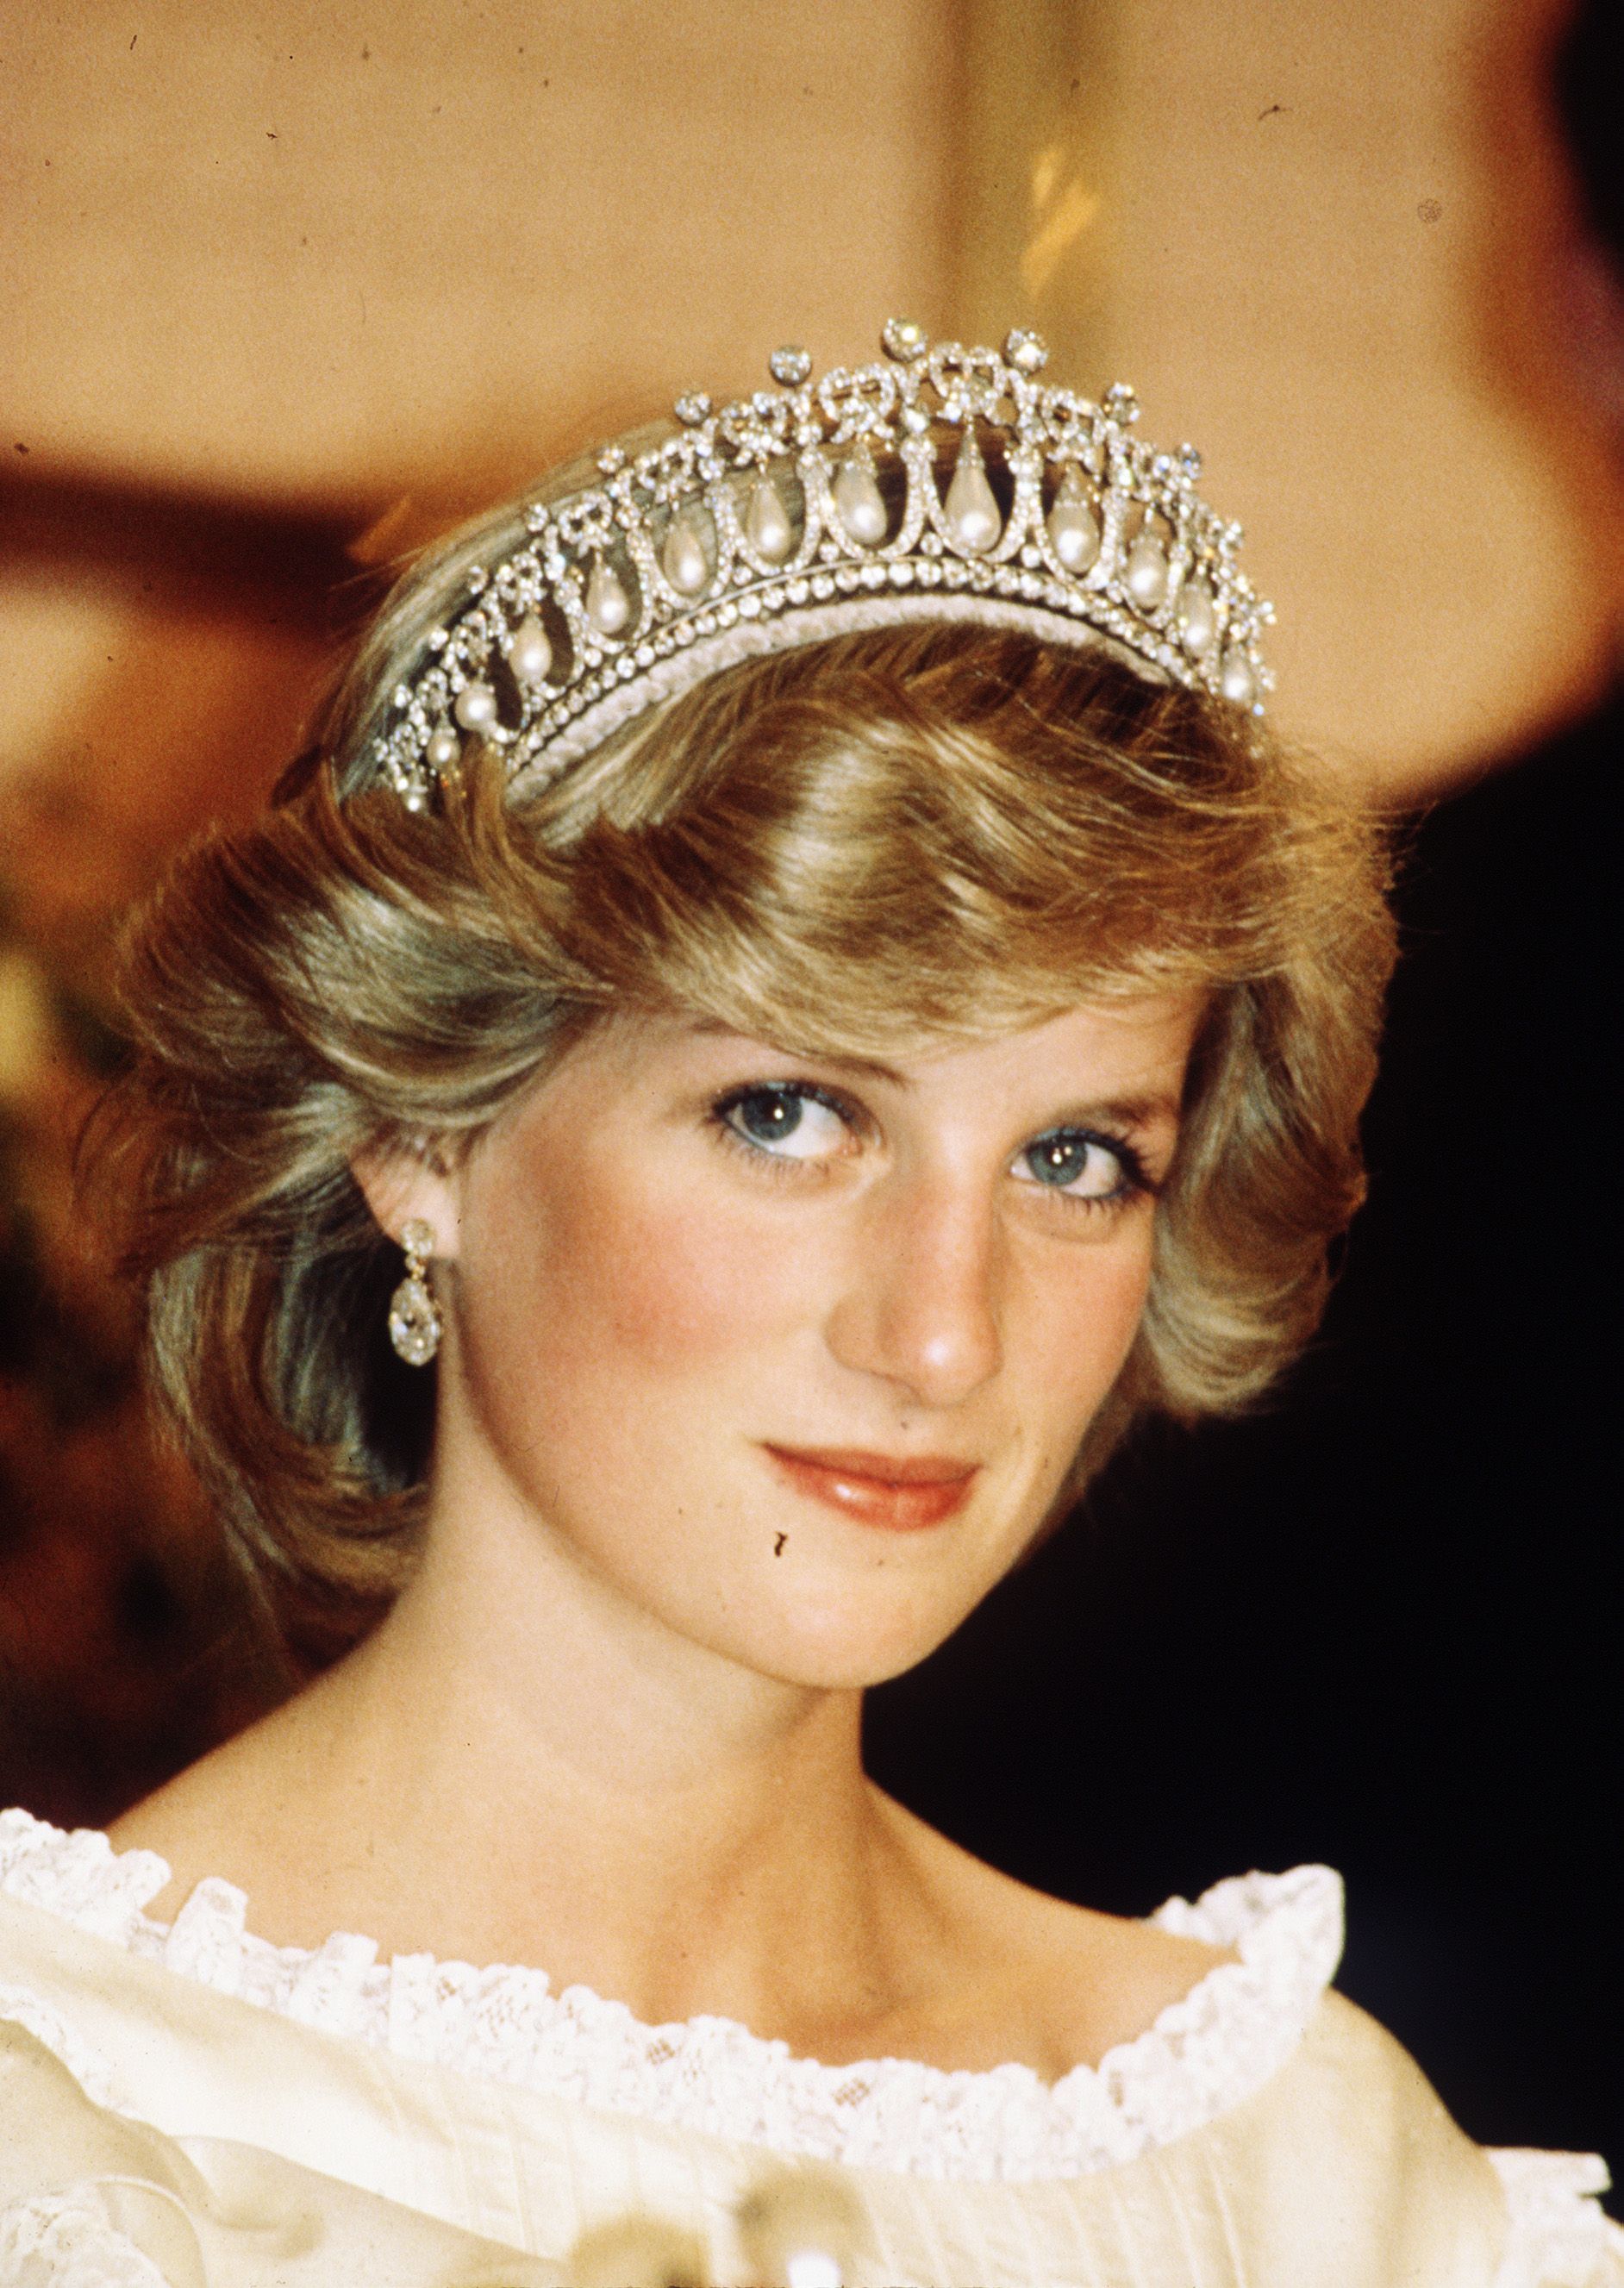 How Did Princess Diana Die? Facts About the'97 Car Crash